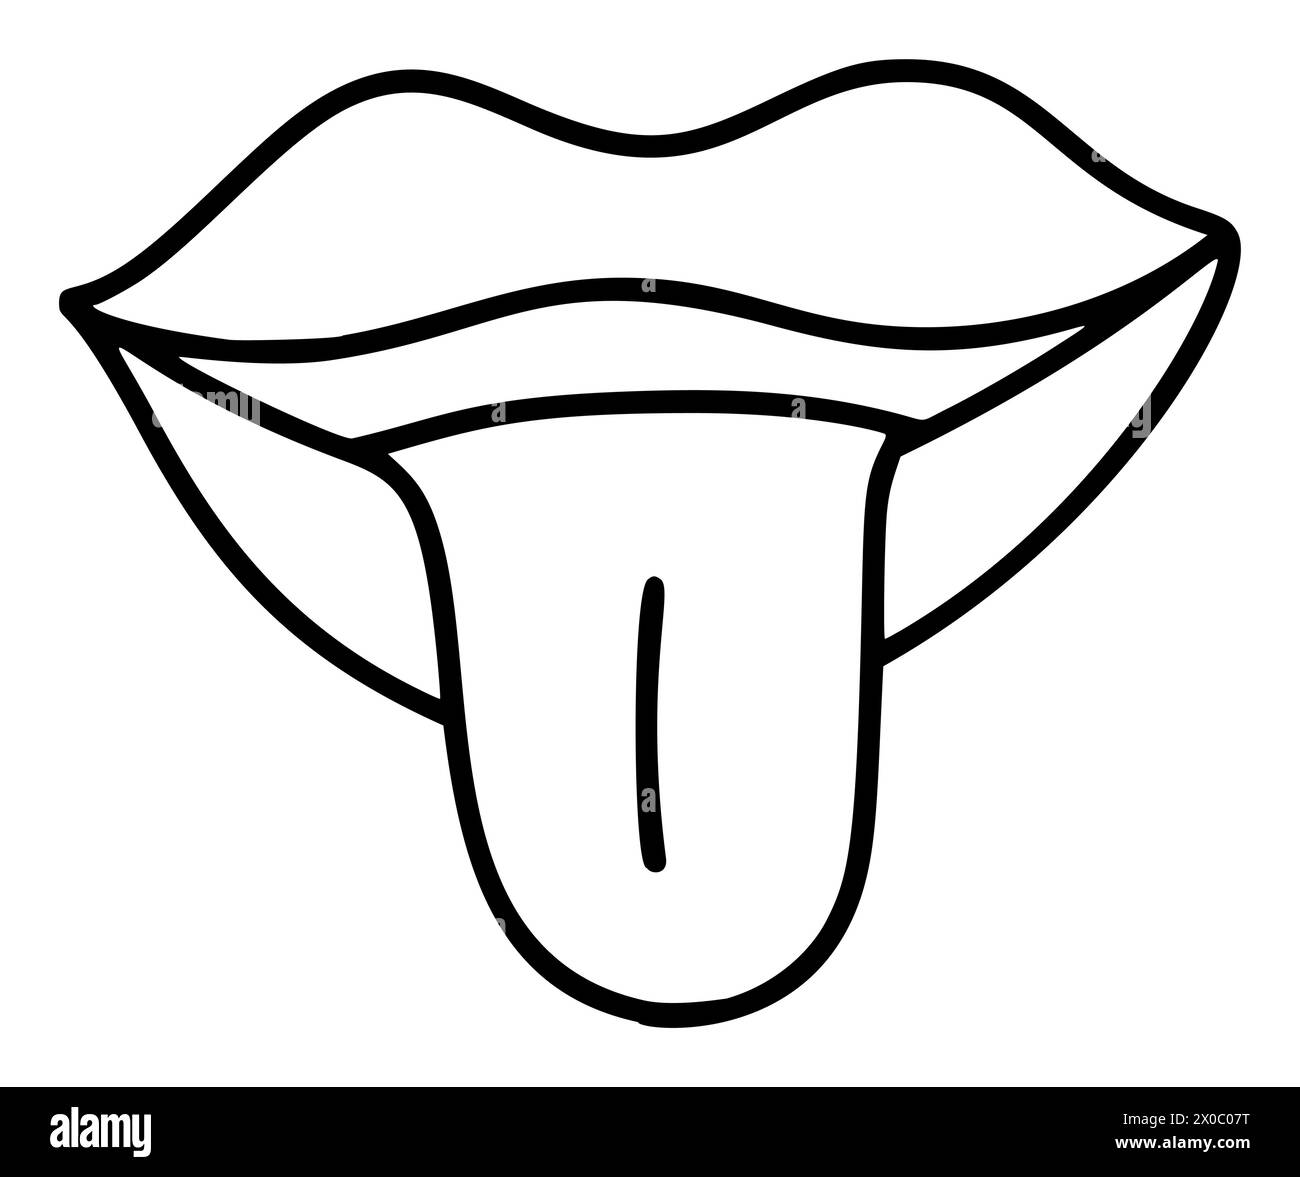 Hand drawn lips with tongue icon in simple doodle style. Woman mouth with lines. Monochrome design Stock Vector